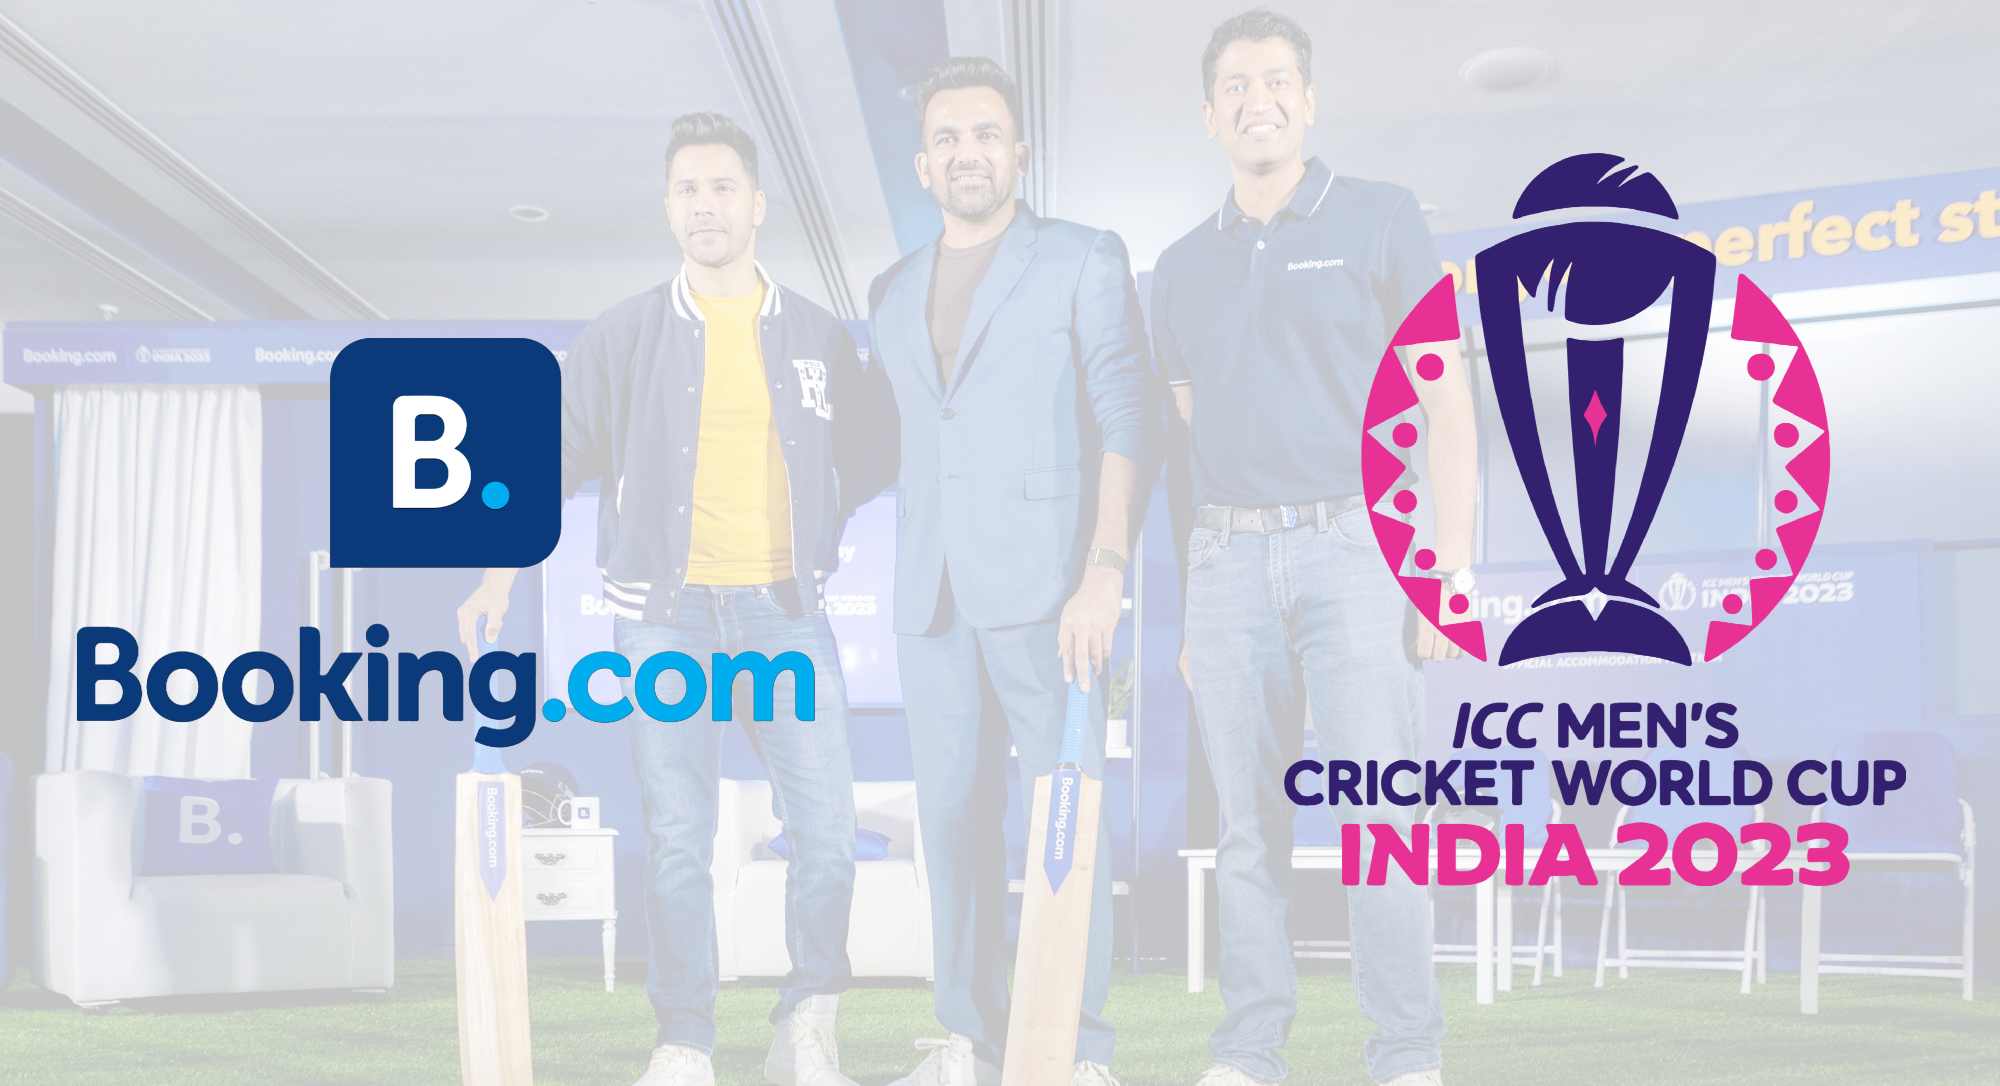 Booking.com unveils ad campaign ‘Howzat for Your Perfect Stay’ for ICC Men’s Cricket World Cup 2023